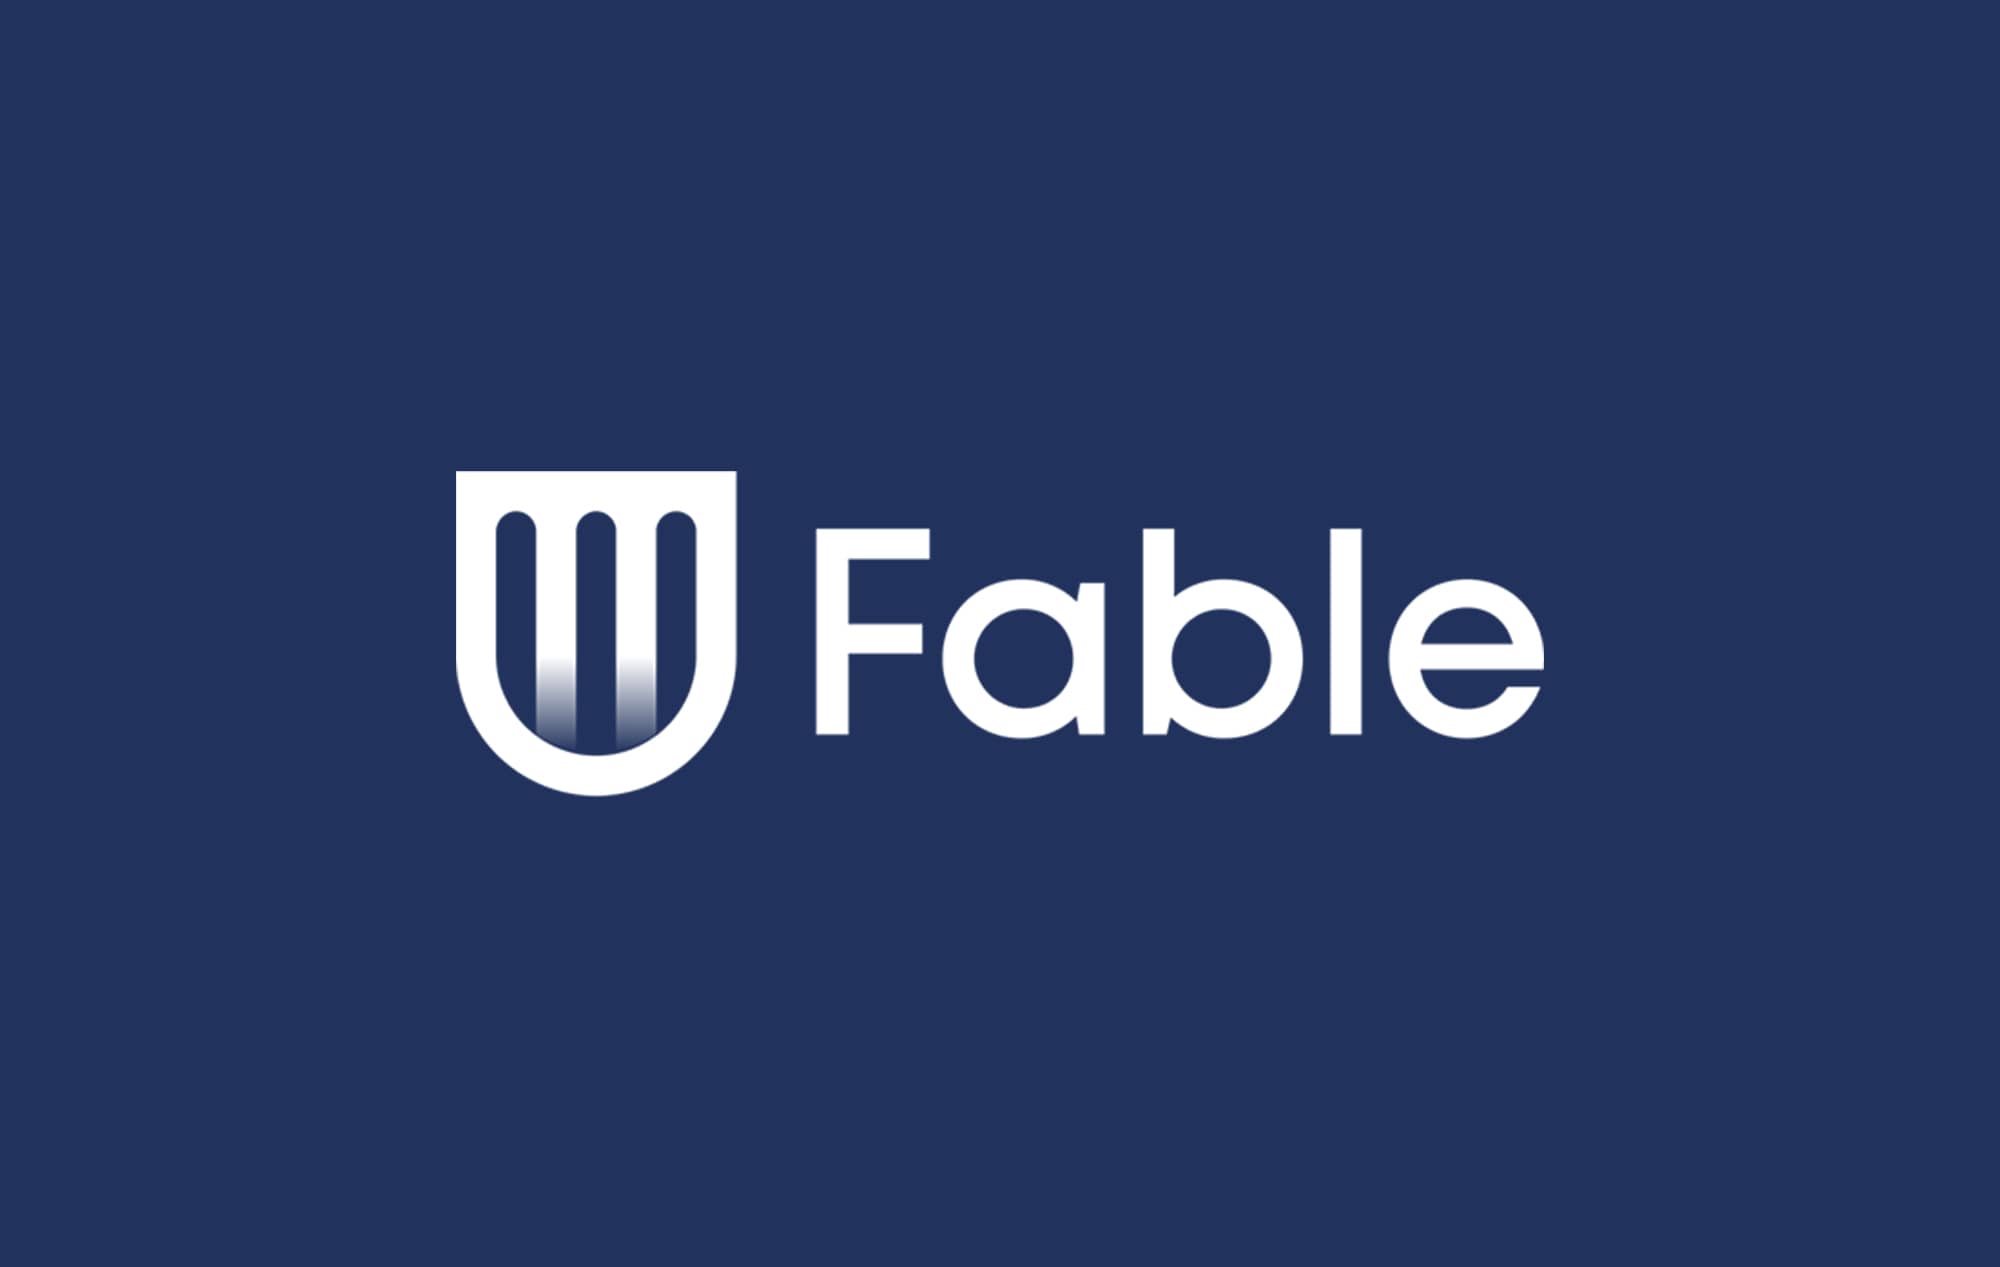 White Fable logo on navy background.